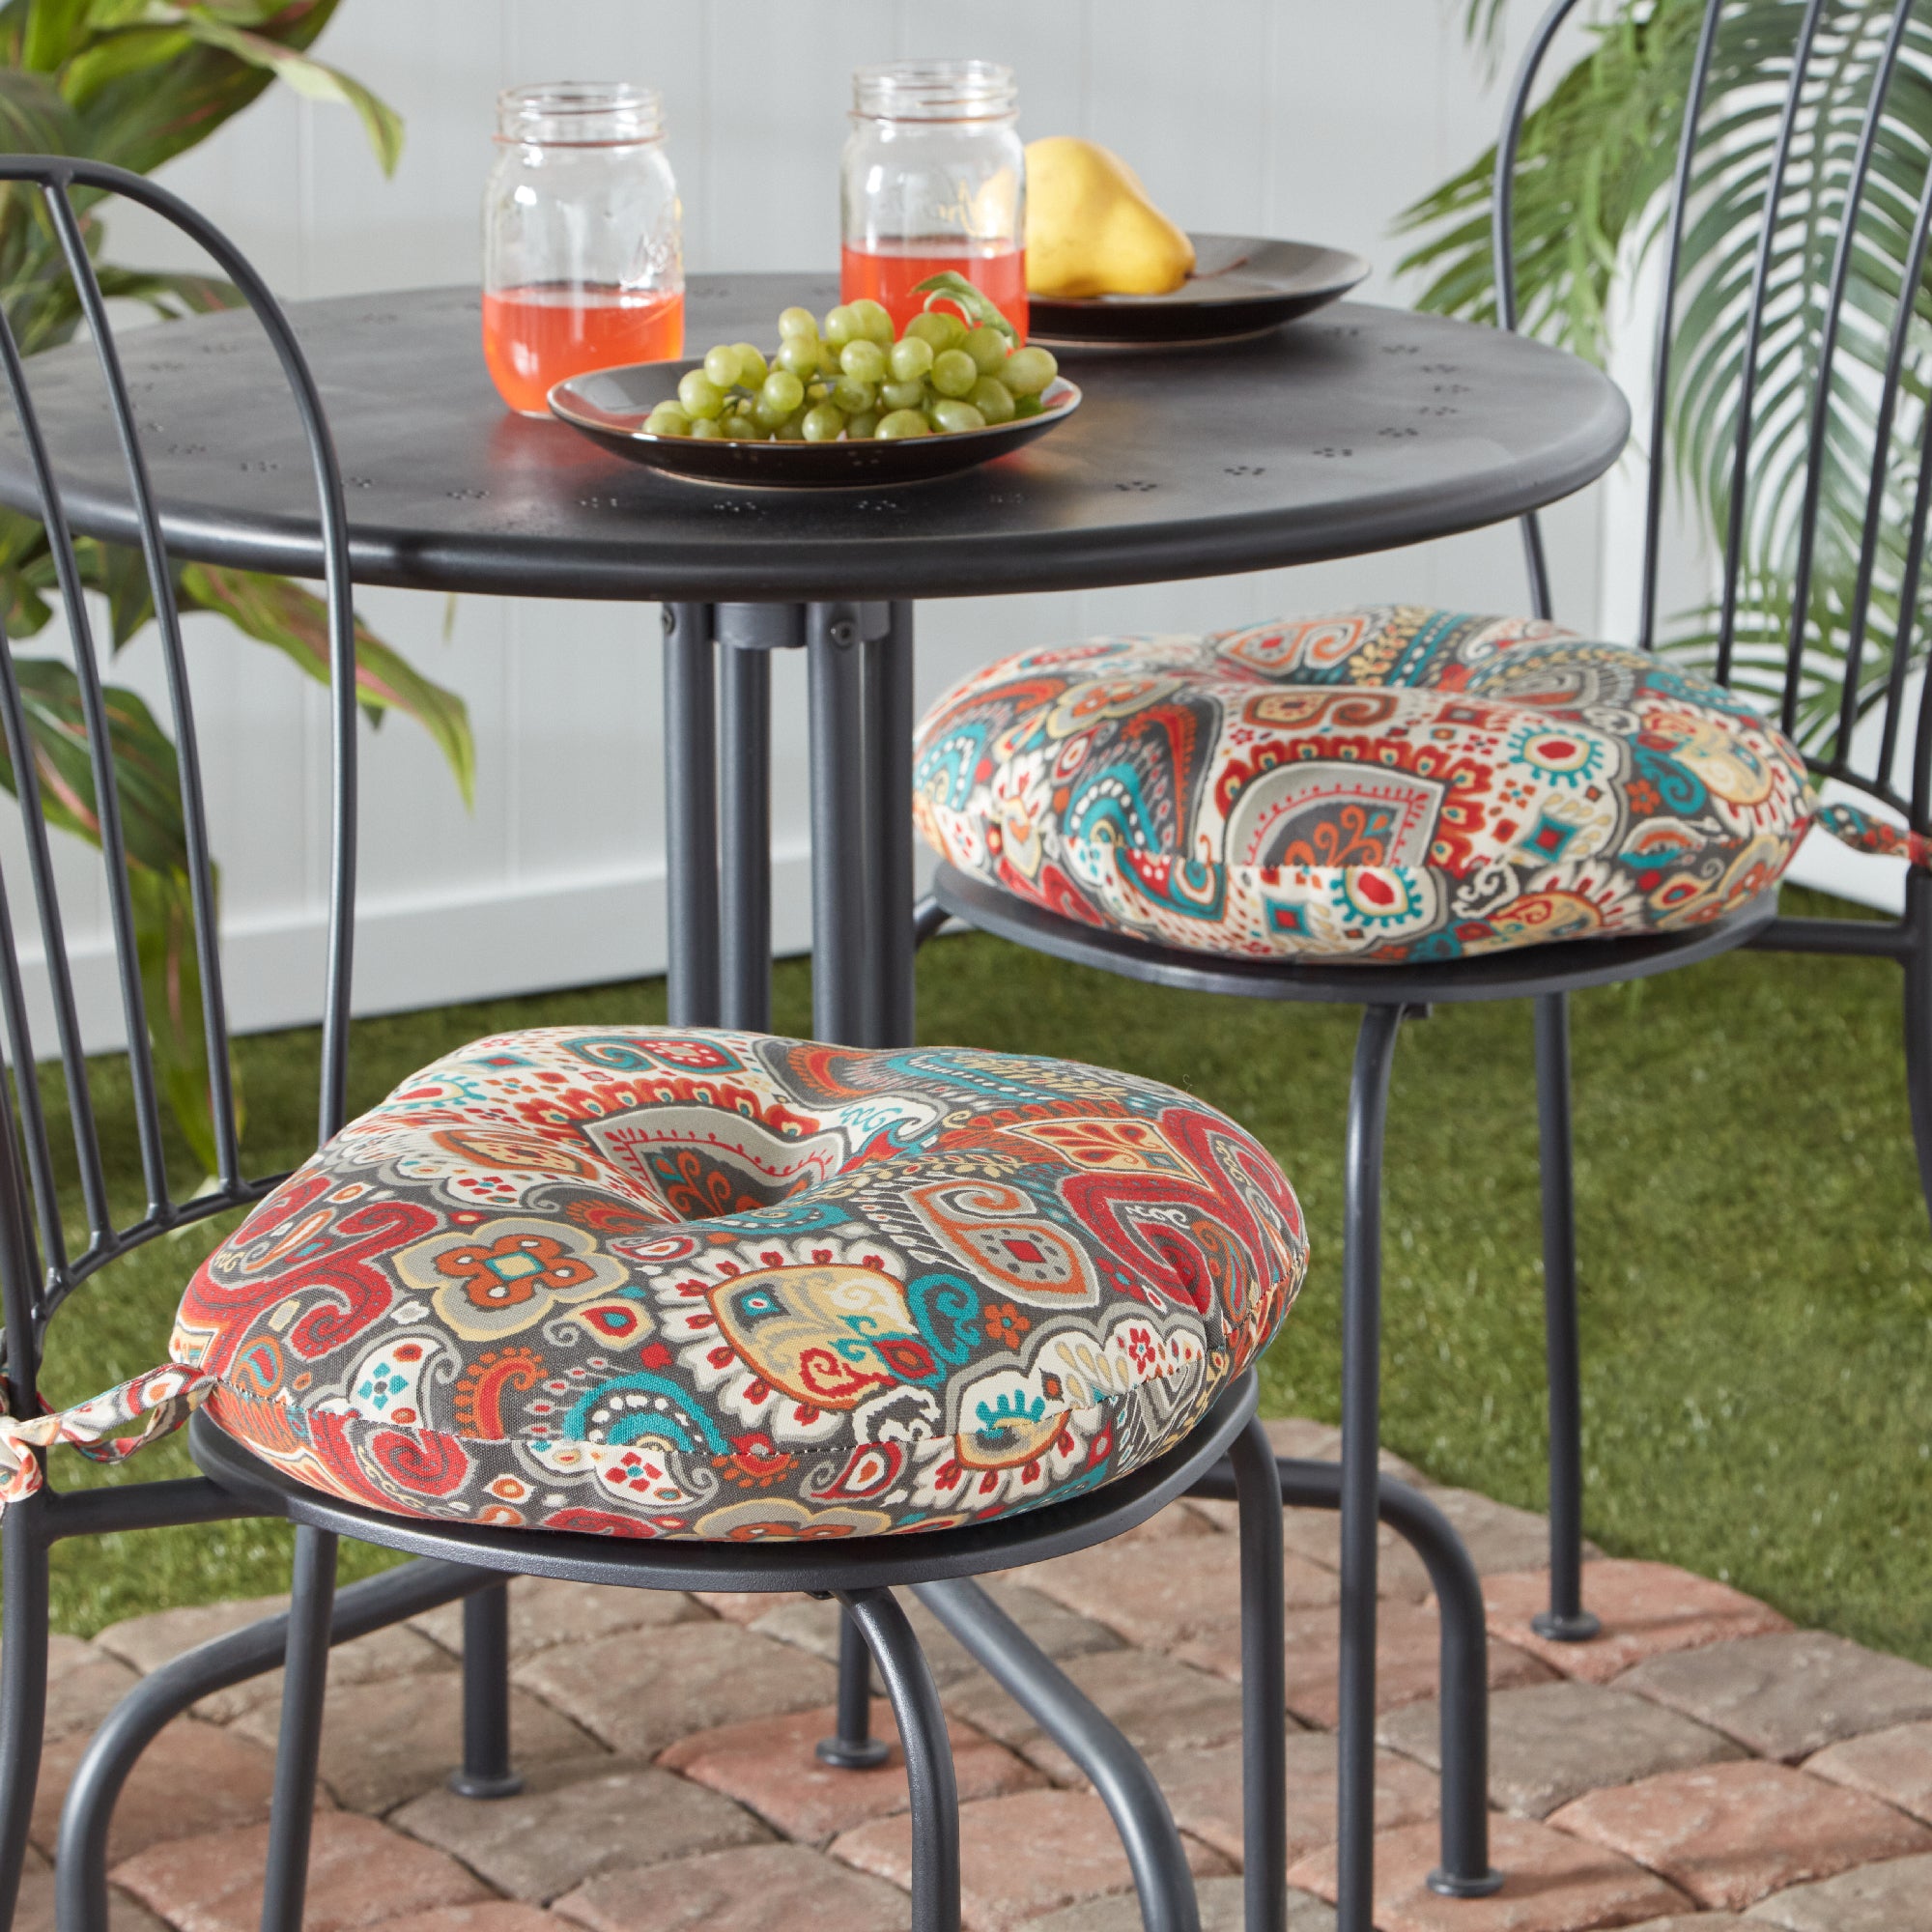 Greendale Home Fashions Rust 15 in. Round Outdoor Reversible Bistro Seat Cushion (Set of 2) - image 5 of 70